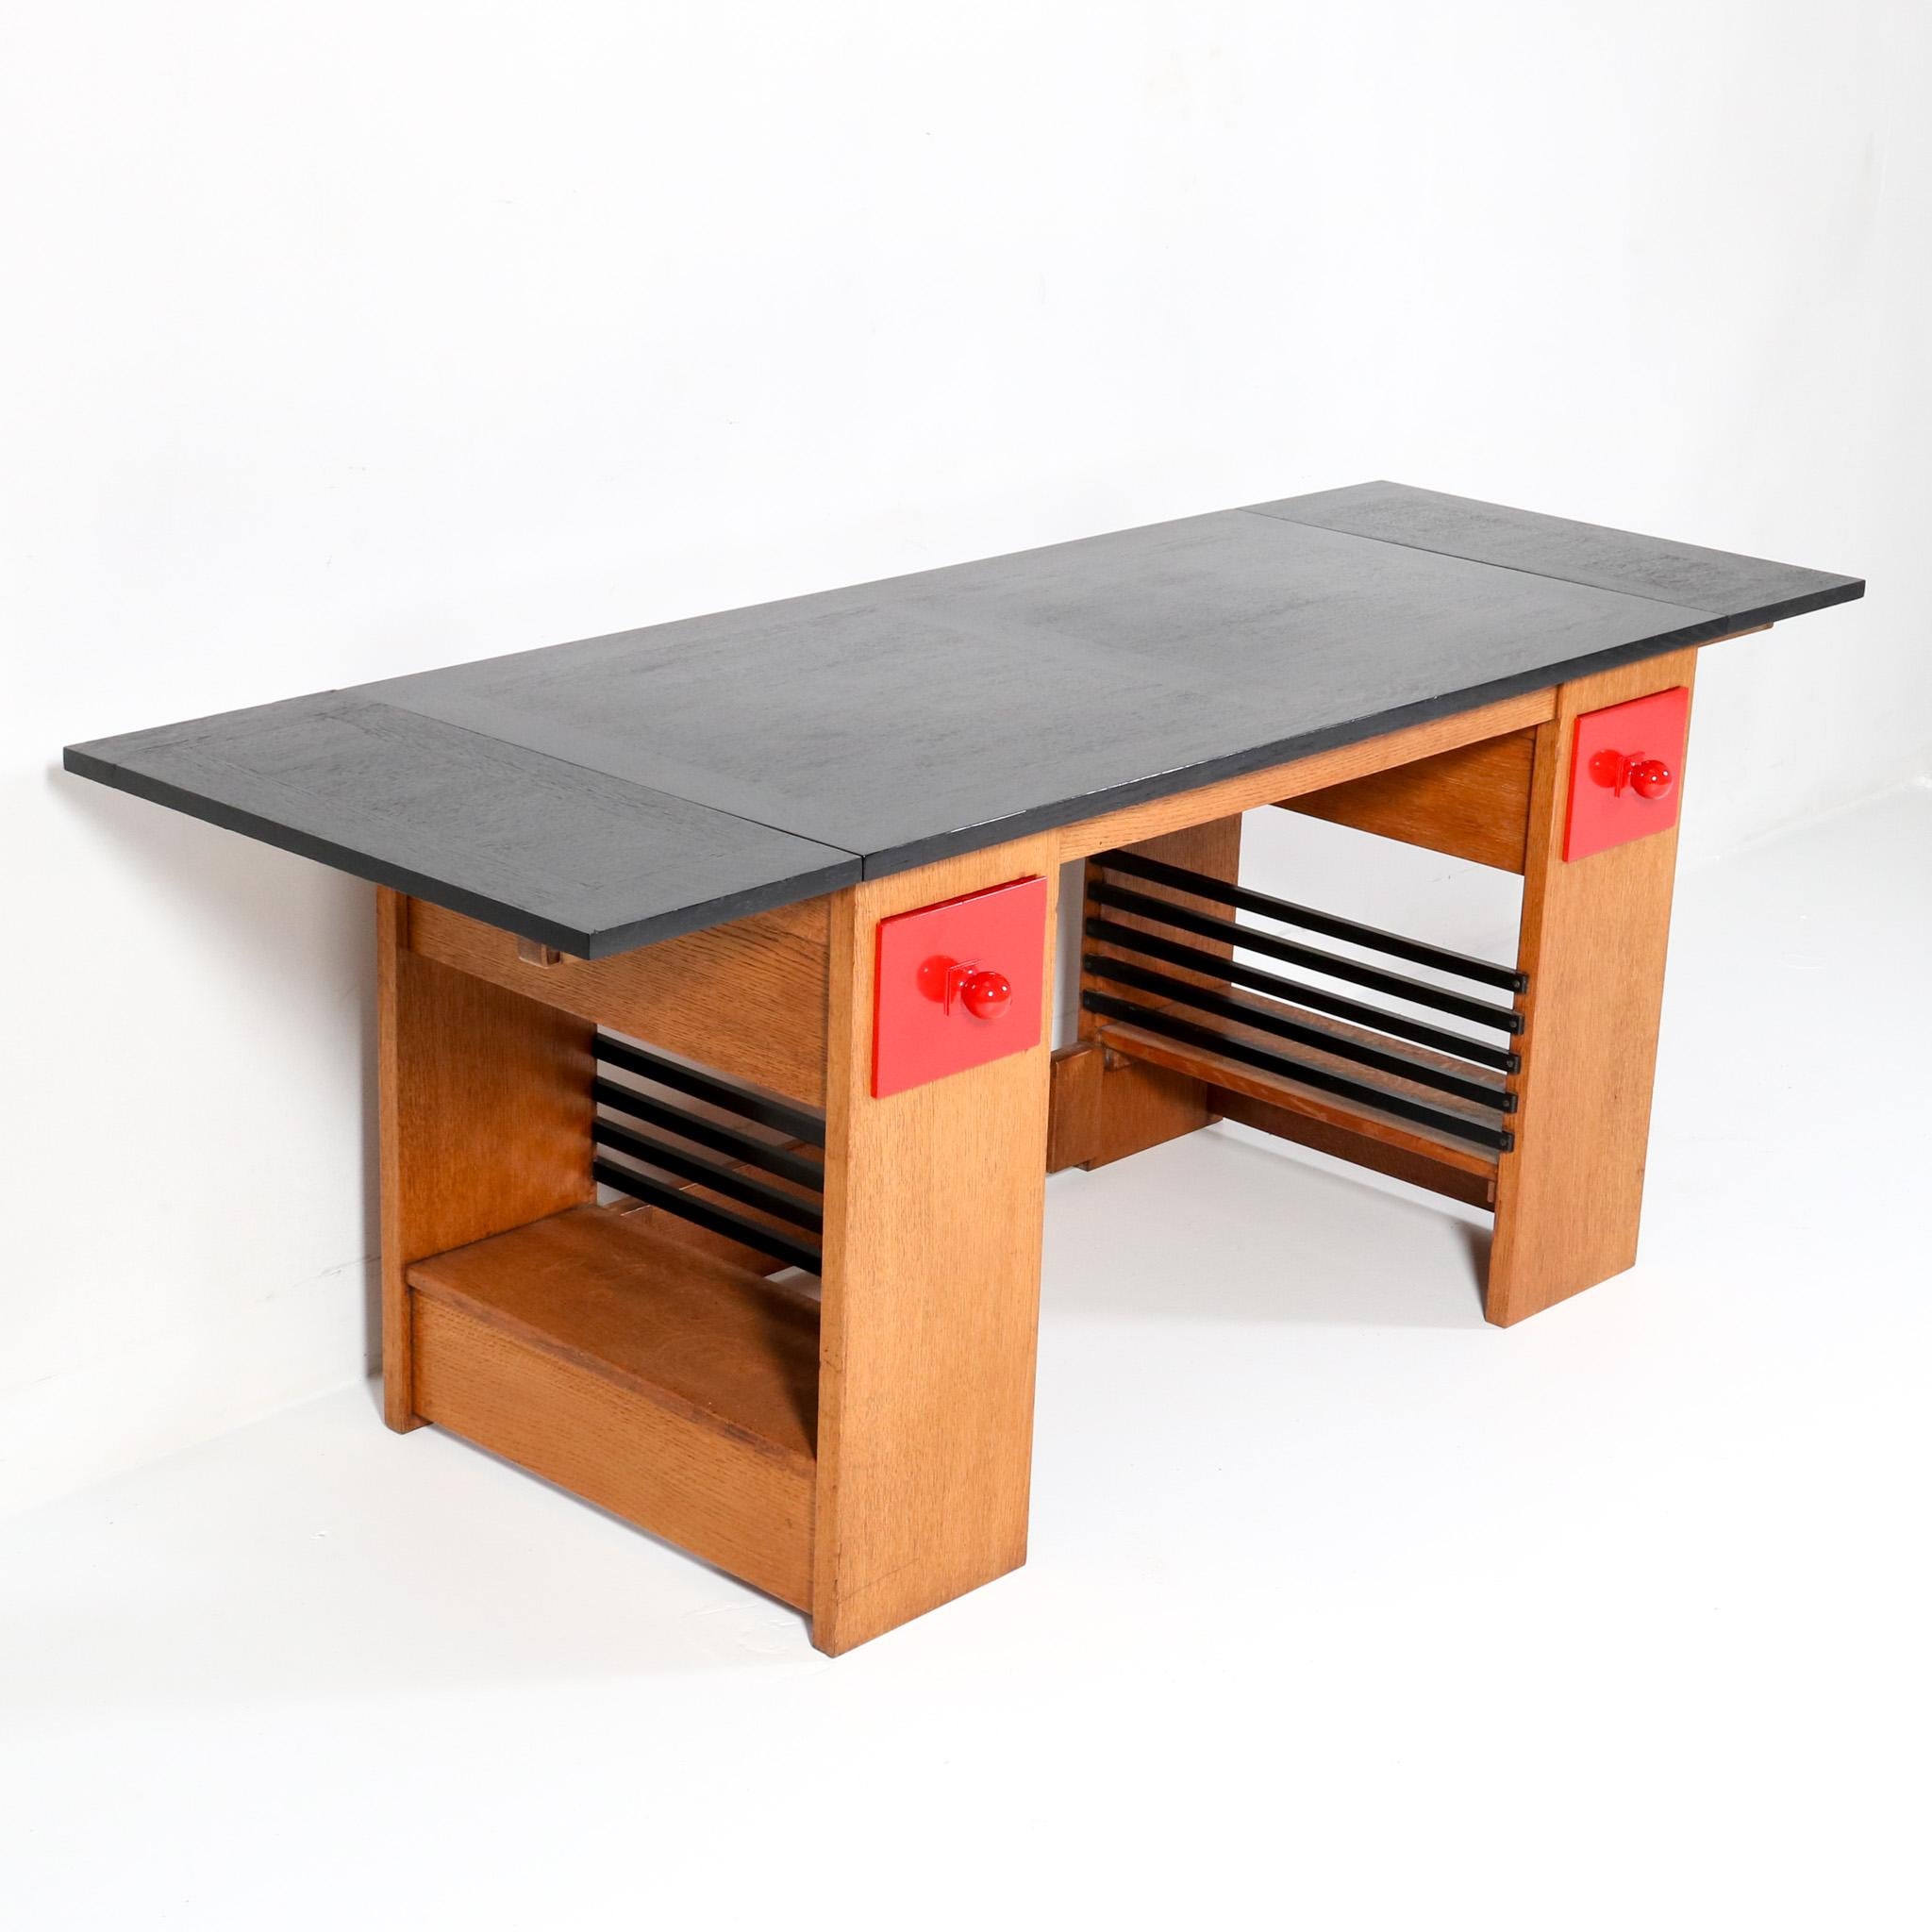 Oak Art Deco Modernist Desk or Writing Table by Hendrik Wouda for Pander, 1920s For Sale 3